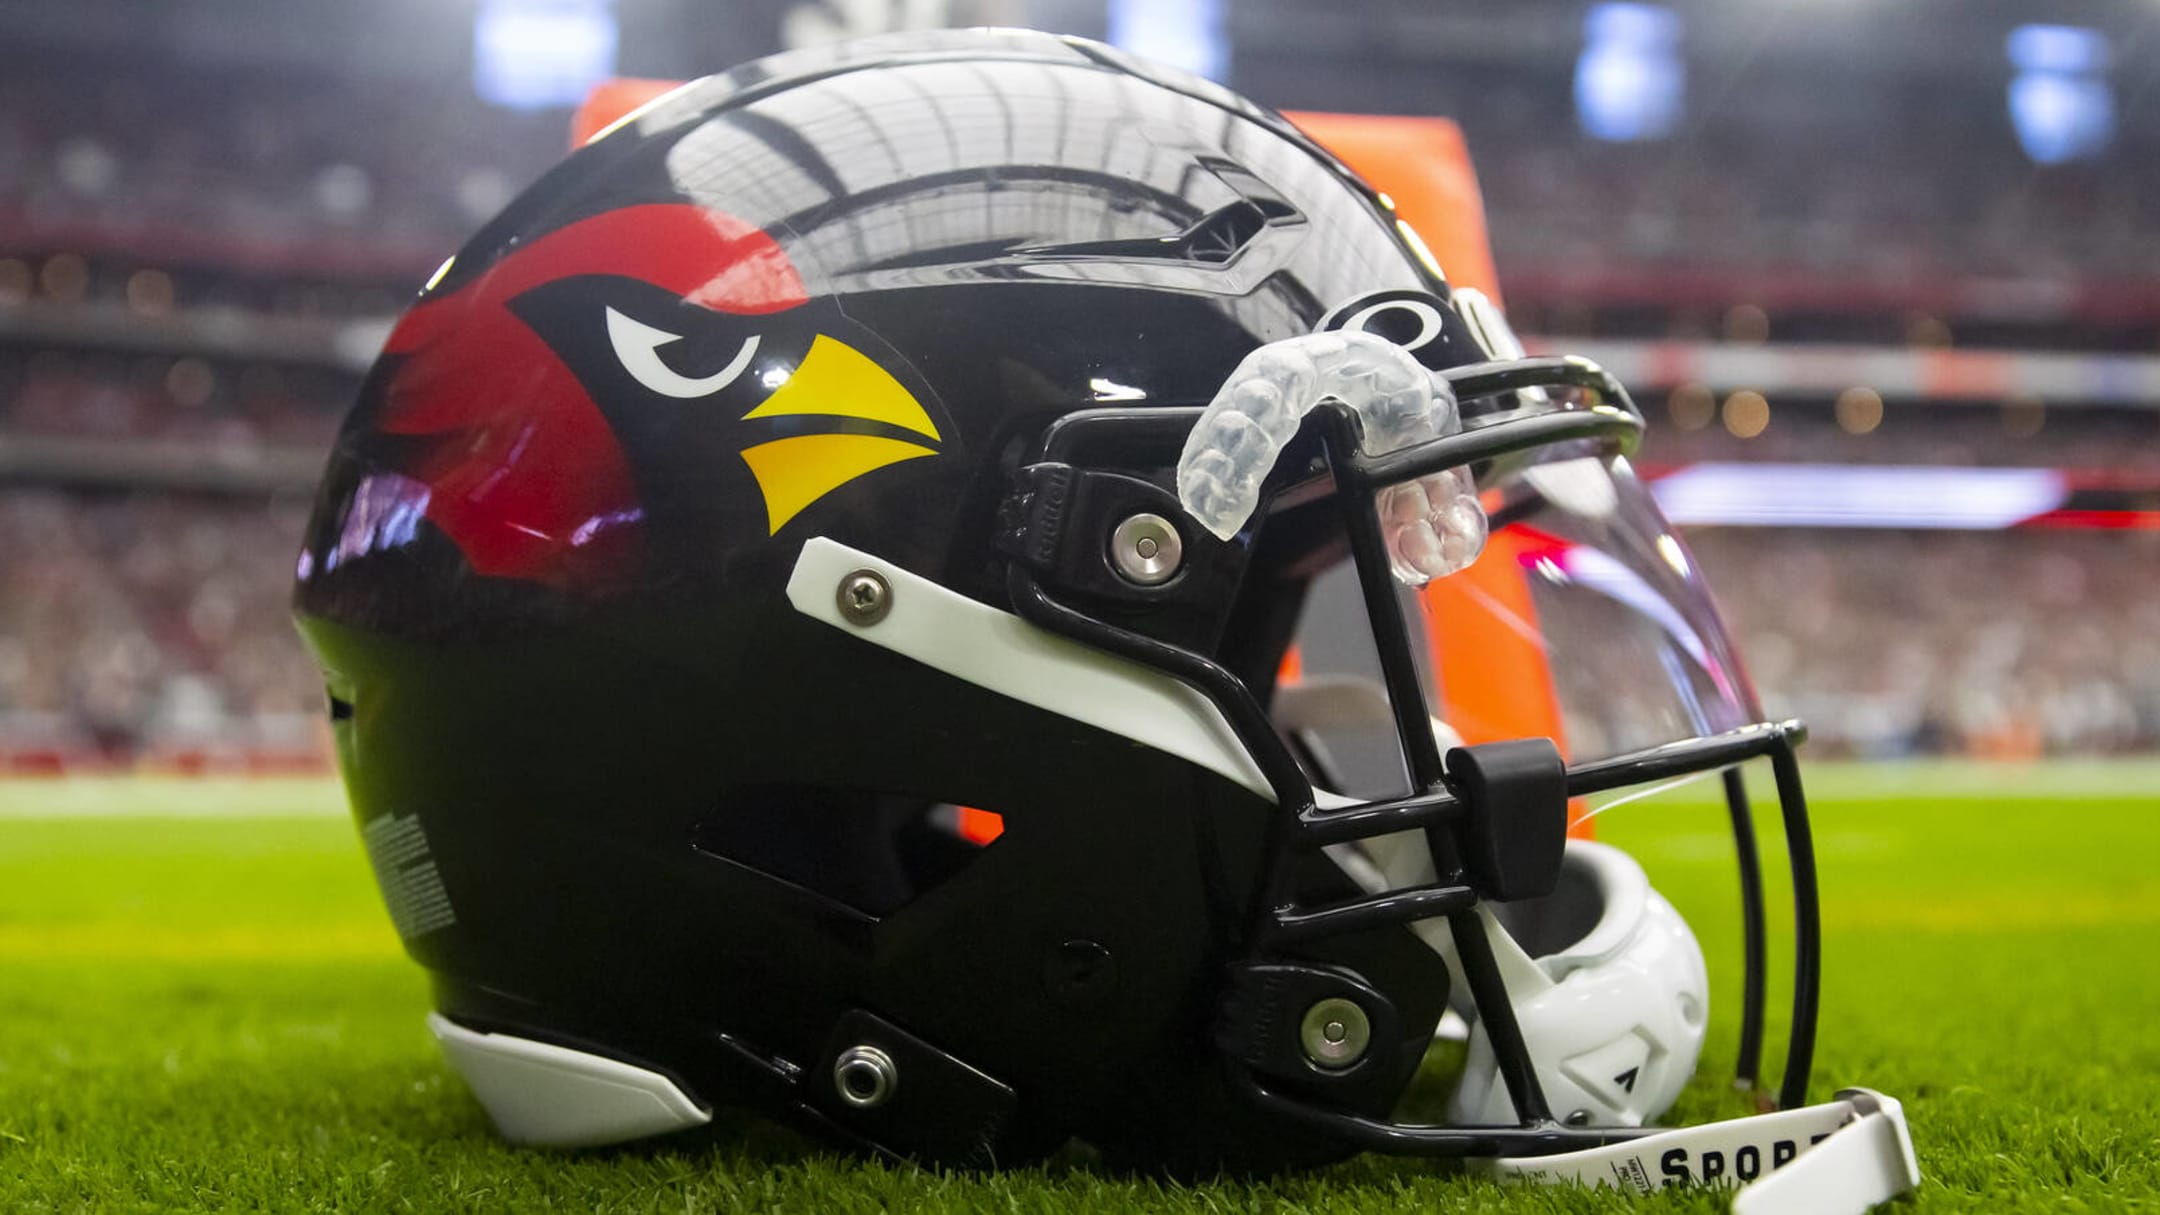 Cardinals to reveal new uniforms on Thursday